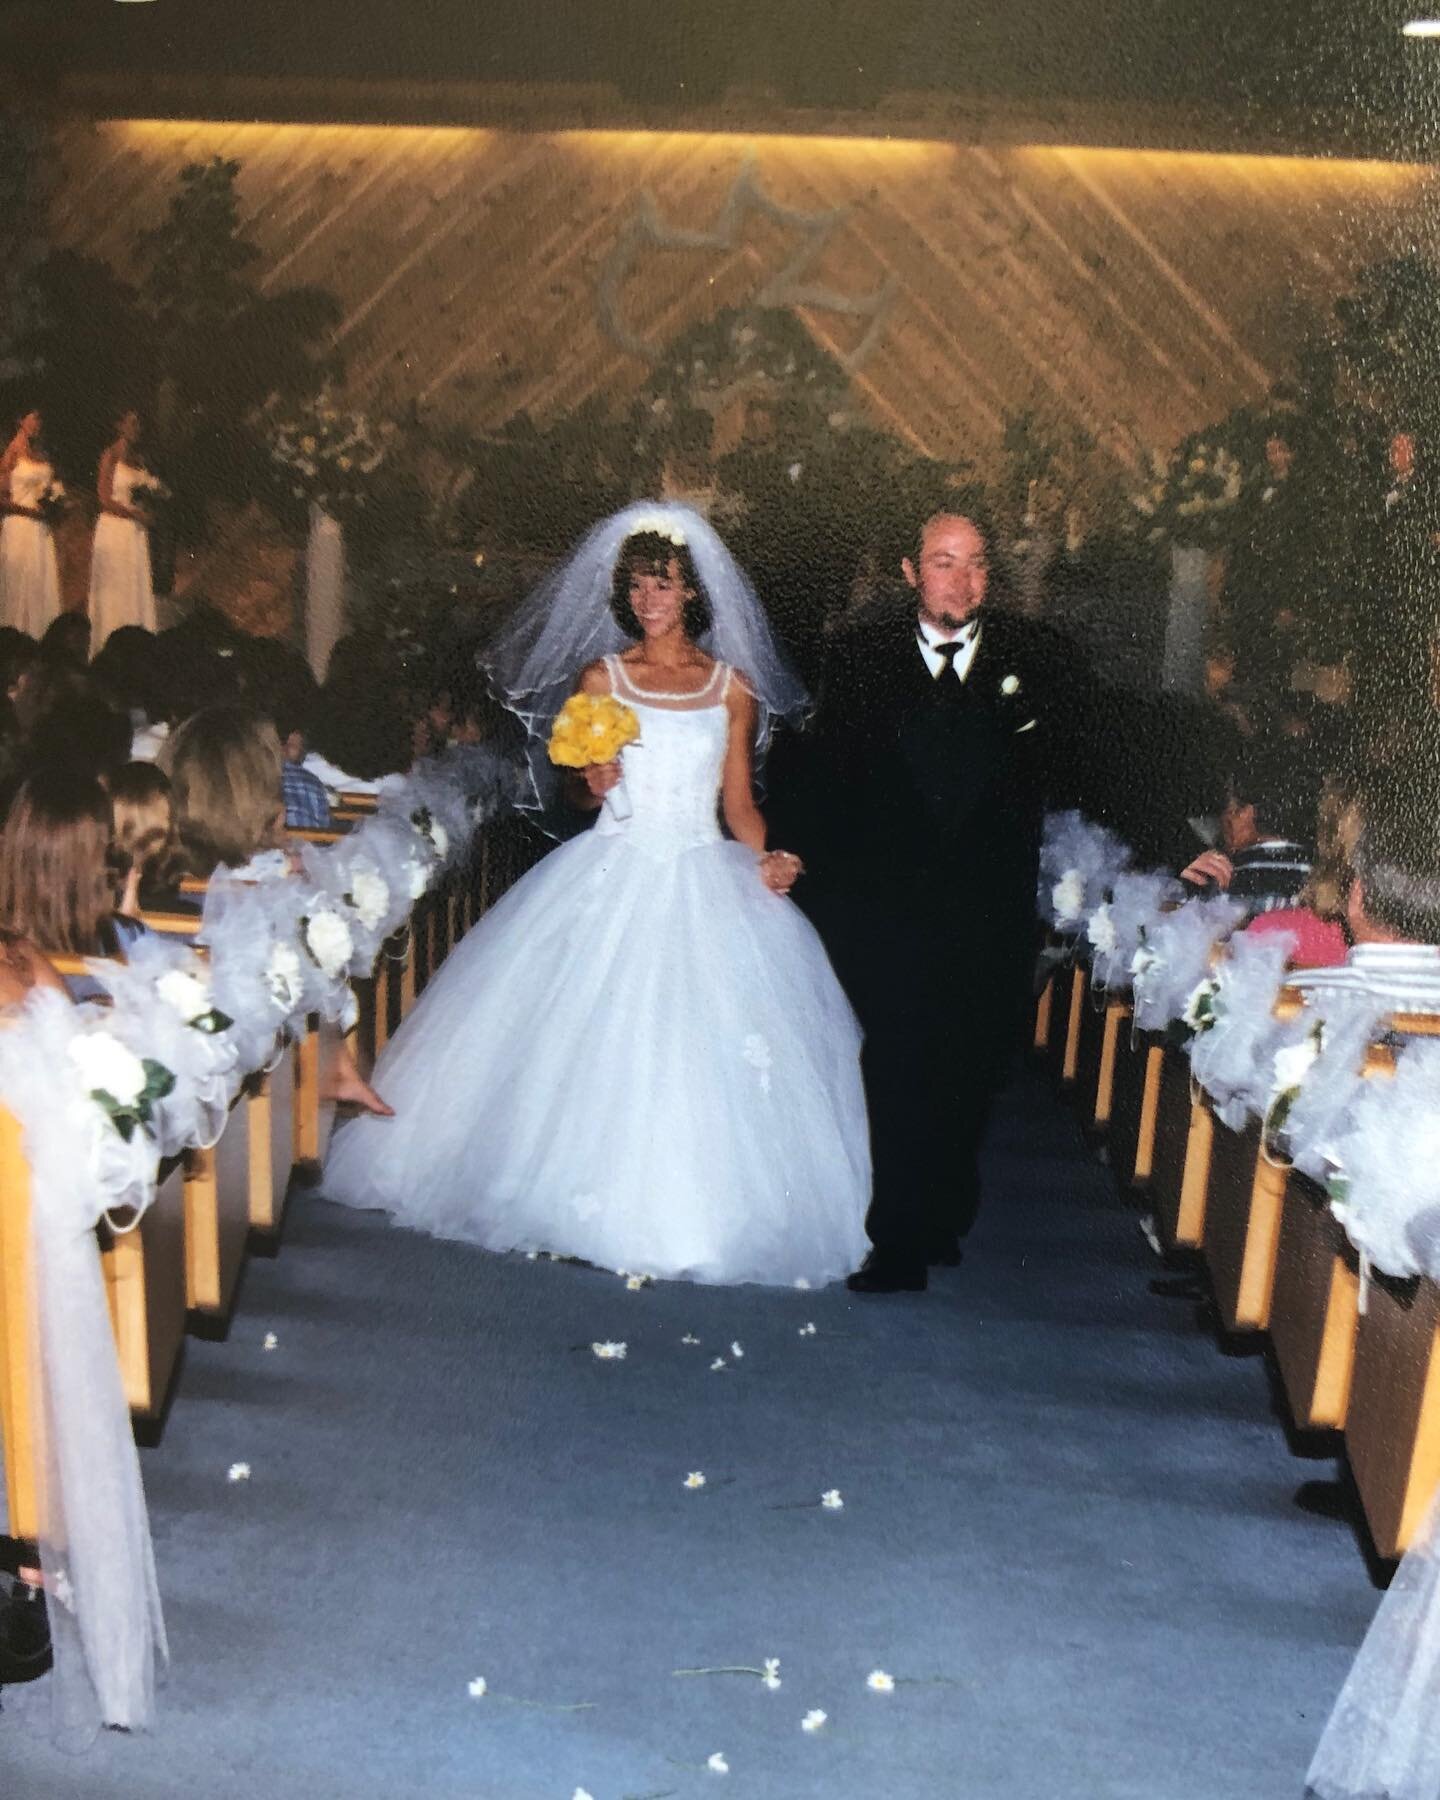 22 years&hellip; AND ONE DAY!! Today officially marks the day that @pastorjasonduff and I have been married LONGER THAN WE HAVEN&rsquo;T! How cute is that? 🤍👰🏻&zwj;♀️🤵🏻💍🤍
22 amazing years down and soooooooo many more fun ones to come 💘 #loveo